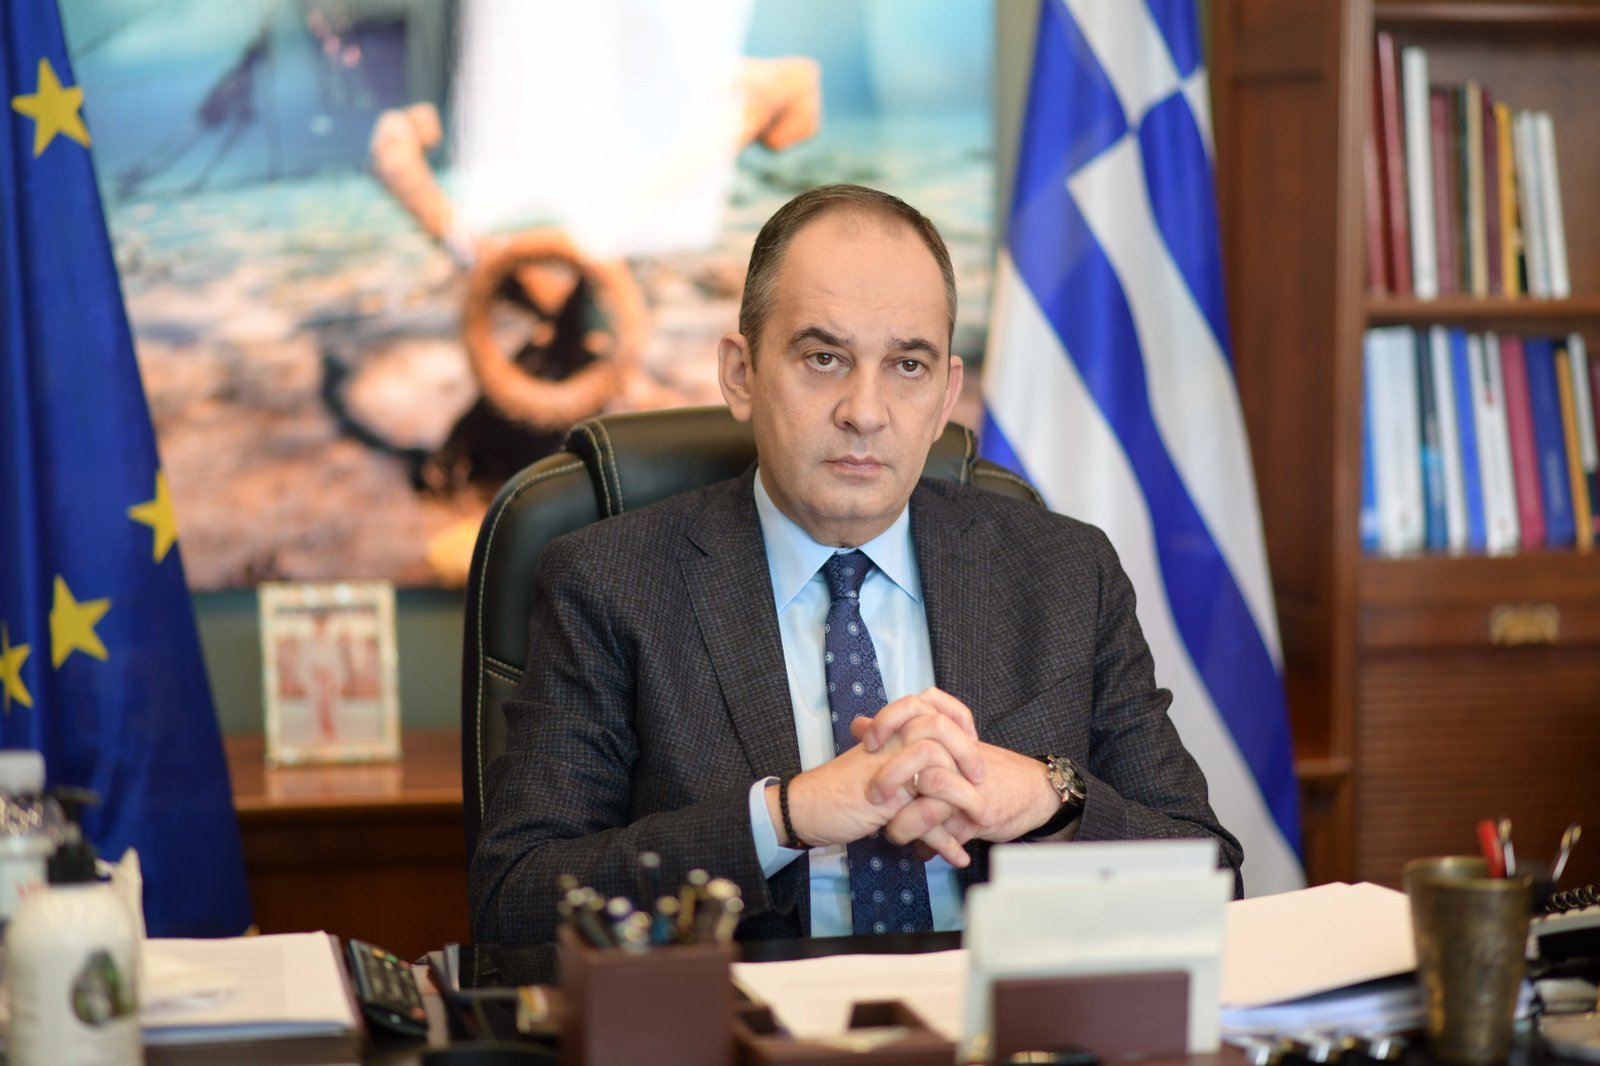 Shipping minister: Shipping needs realistic and feasible measures